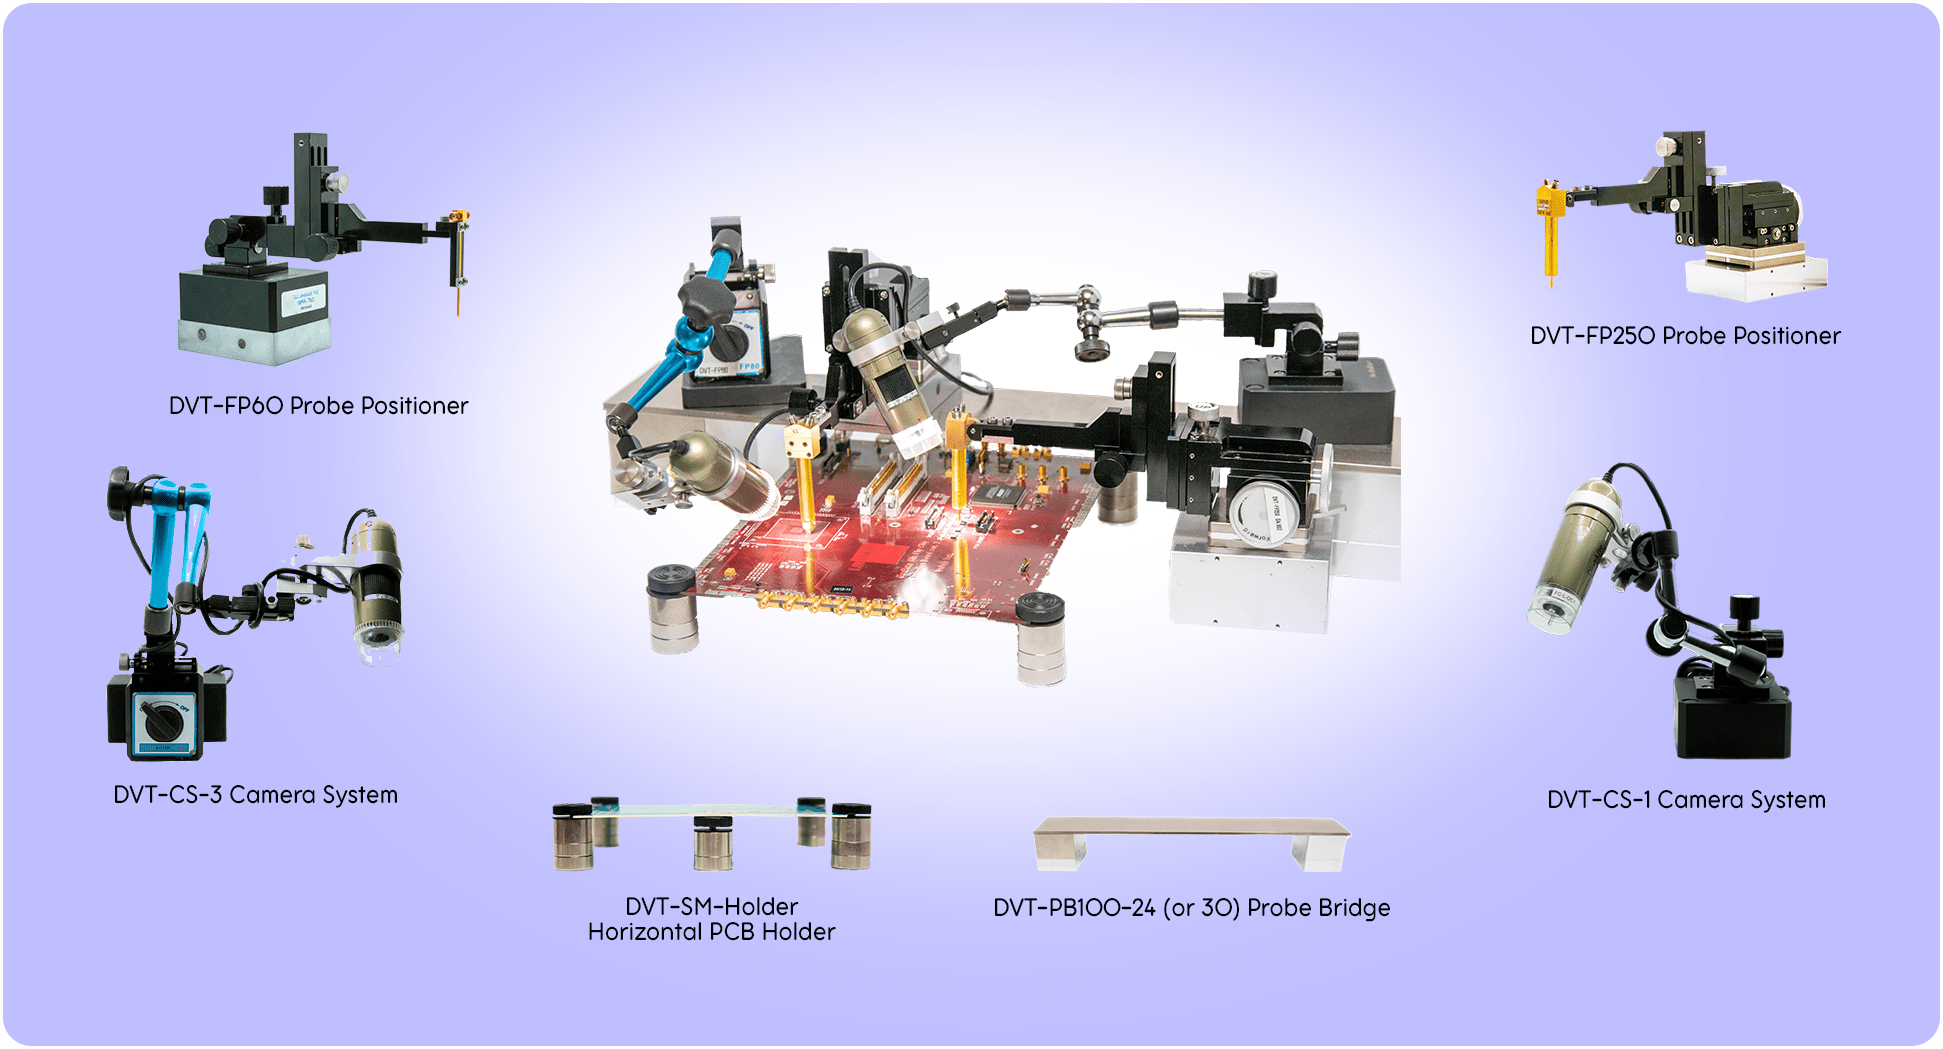 Image shows a complete DVT Solutions horizontal probing solution and individual pictures of several components and fixtures.